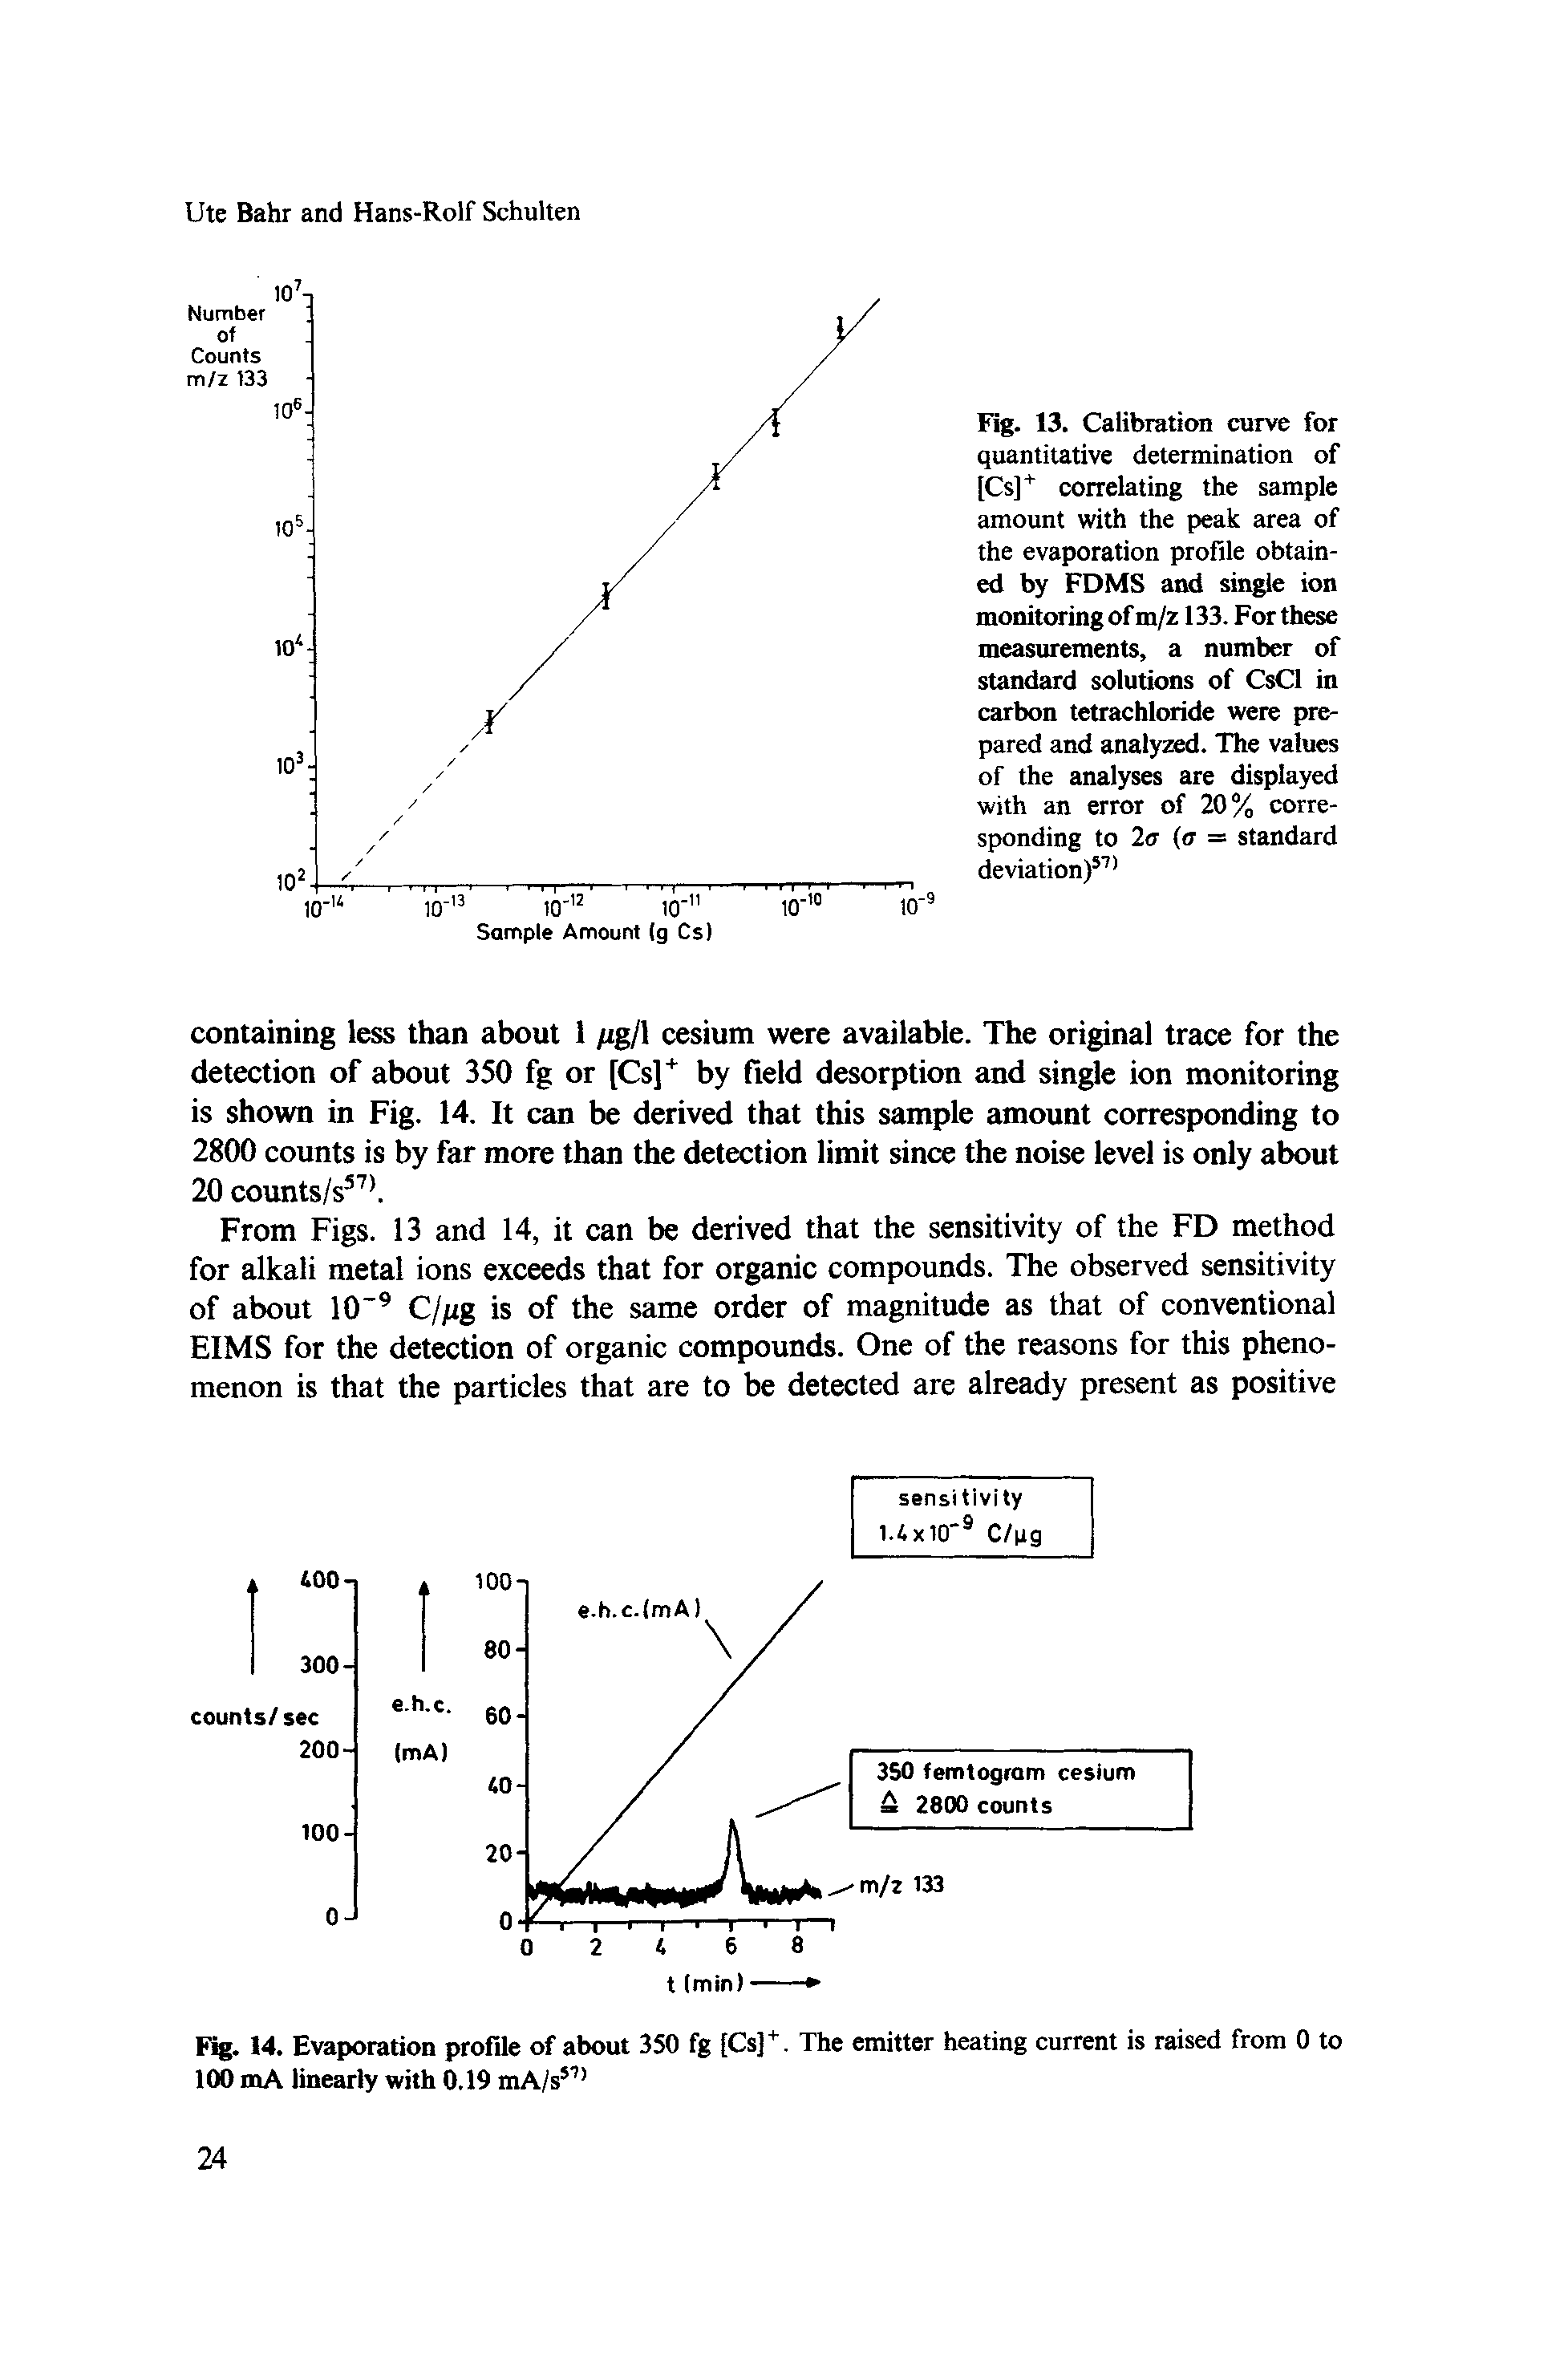 Fig. 13. Calibration curve for quantitative determination of [Cs]" correlating the sample amount with the peak area of the evaporation profile obtained by FDMS and sin e ion monitoring of m/z 133. For these measurements, a number of standard solutions of CsCl in carbon tetrachloride were prepared and analyzed. The values of the analyses are displayed with an error of 20% corresponding to 2<r (<T = standard deviation) ...